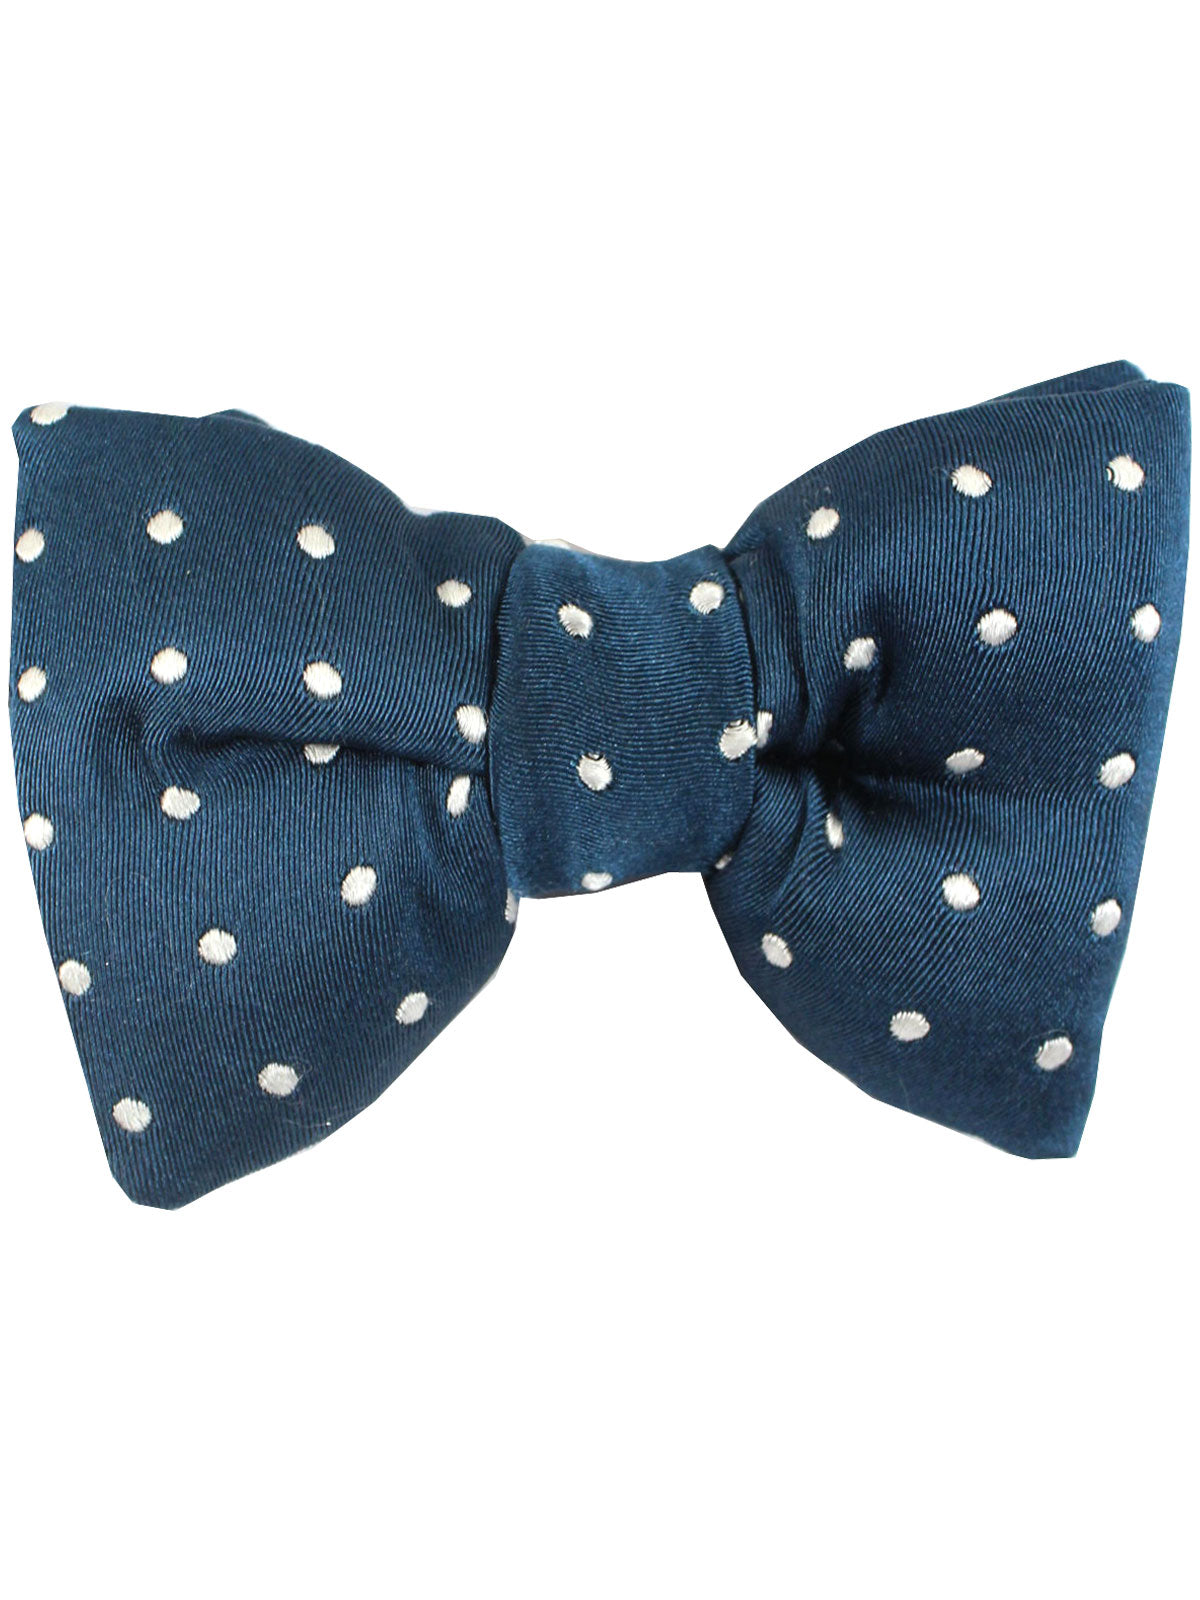 Tom Ford Bow Tie Blue Black White Dots